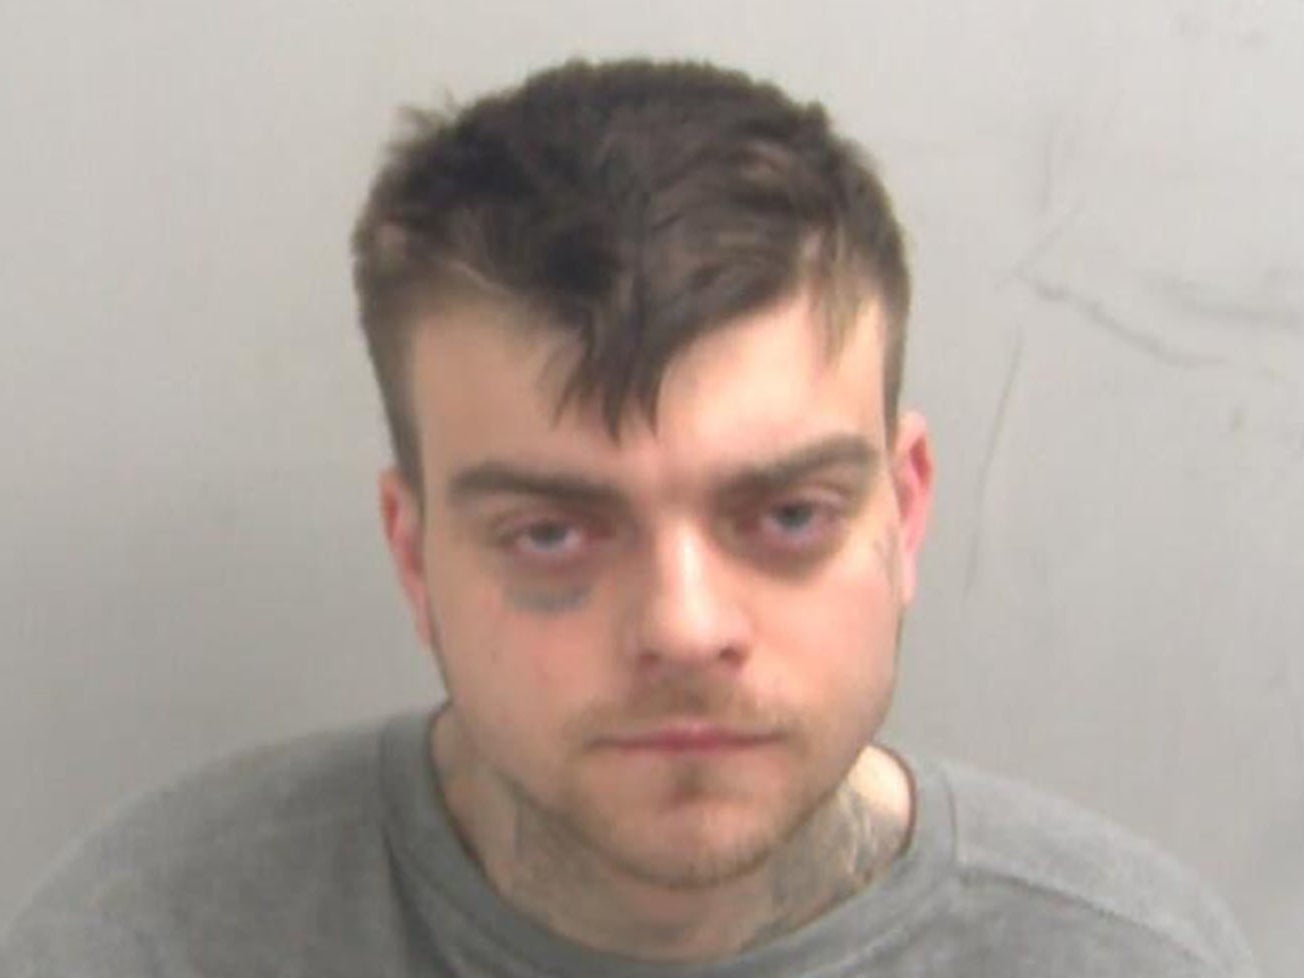 Jack Sepple has been sentenced to a minimum of 23 years in prison